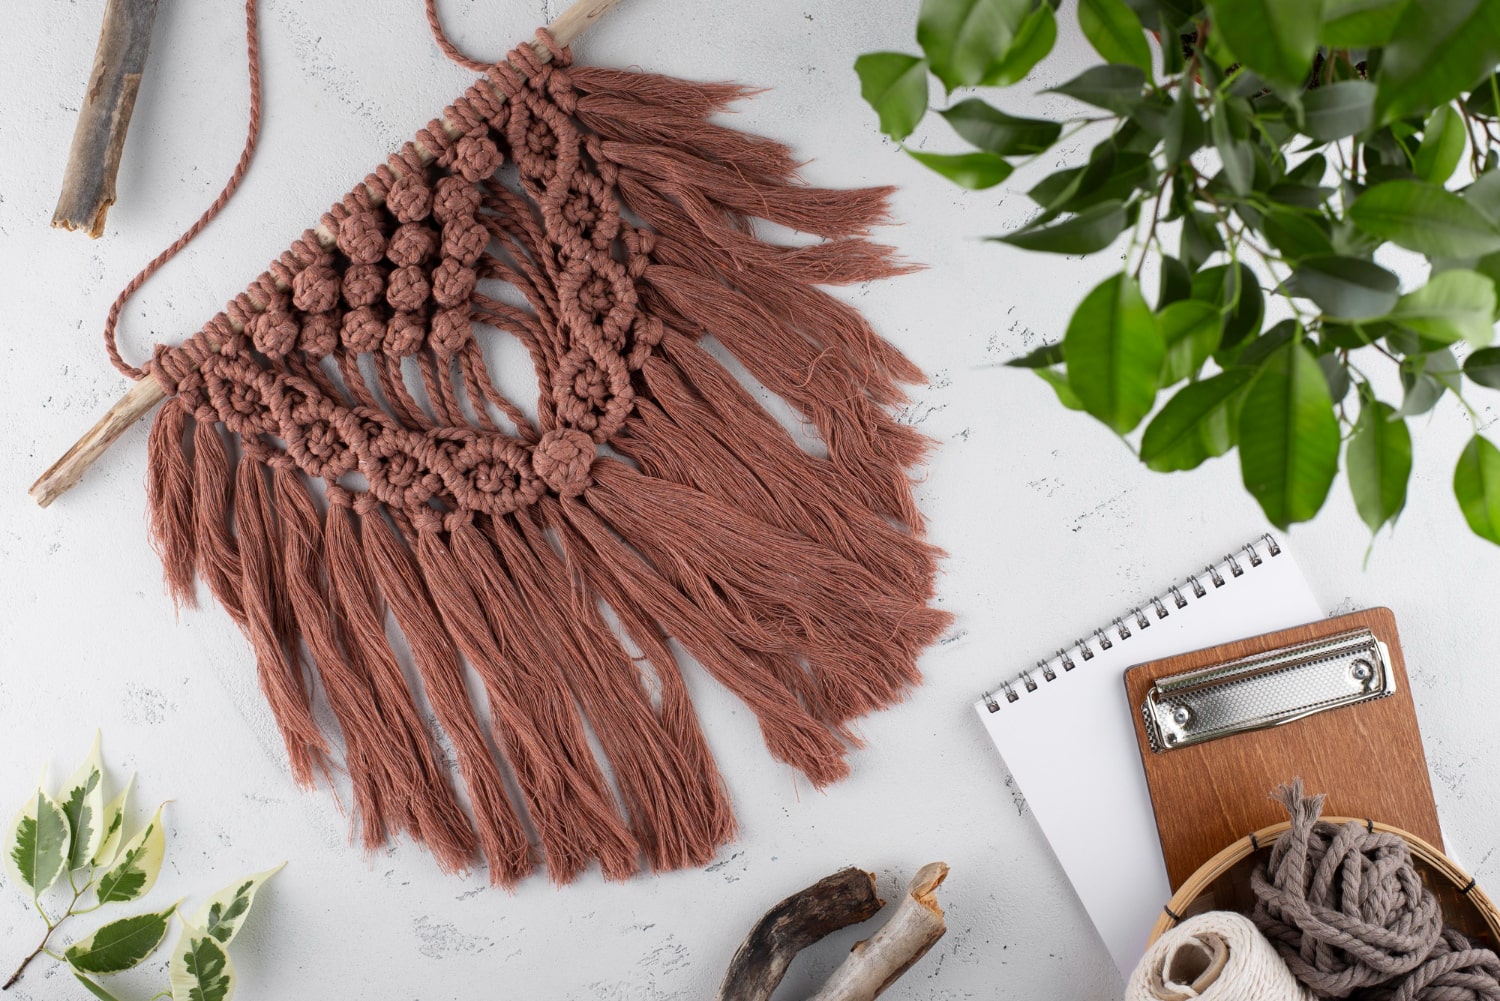 A stylish macrame wall hanging adorned with lush plants, adding a touch of nature to your home decor.